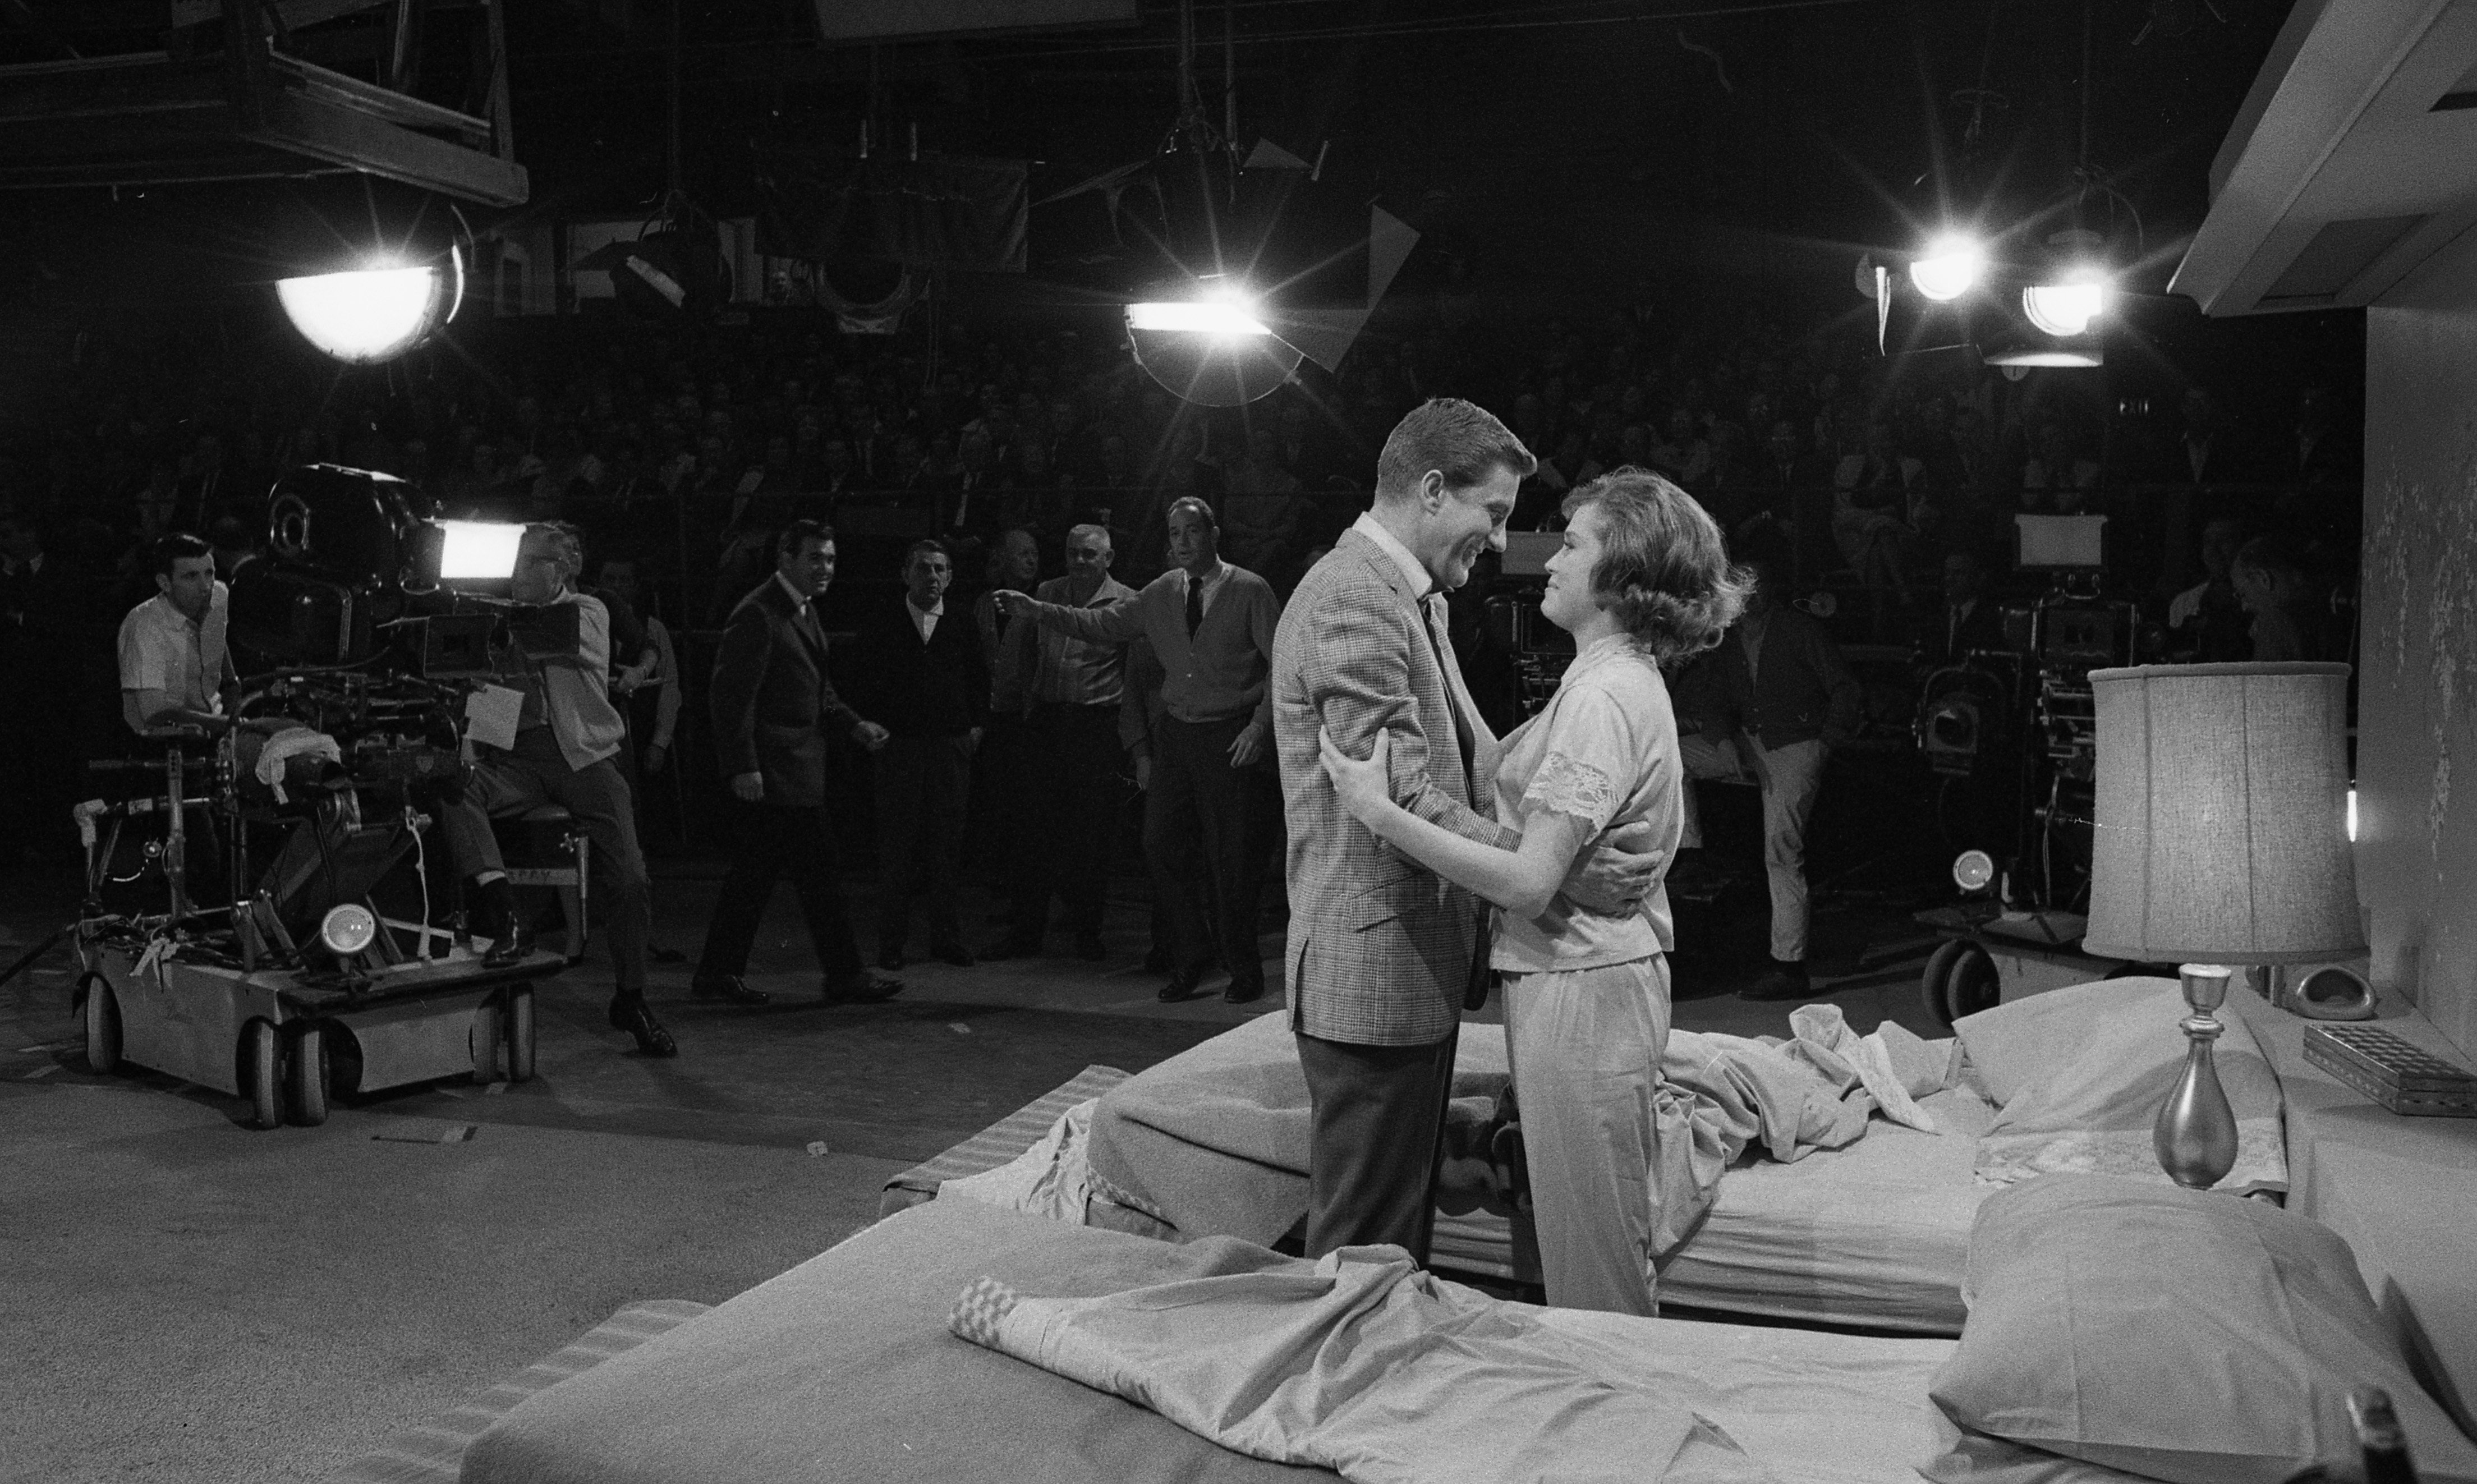 Dick Van Dyke and actress Mary Tyler Moore in rehearsal for The Dick Van Dyke Show stand in front of thier twin beds